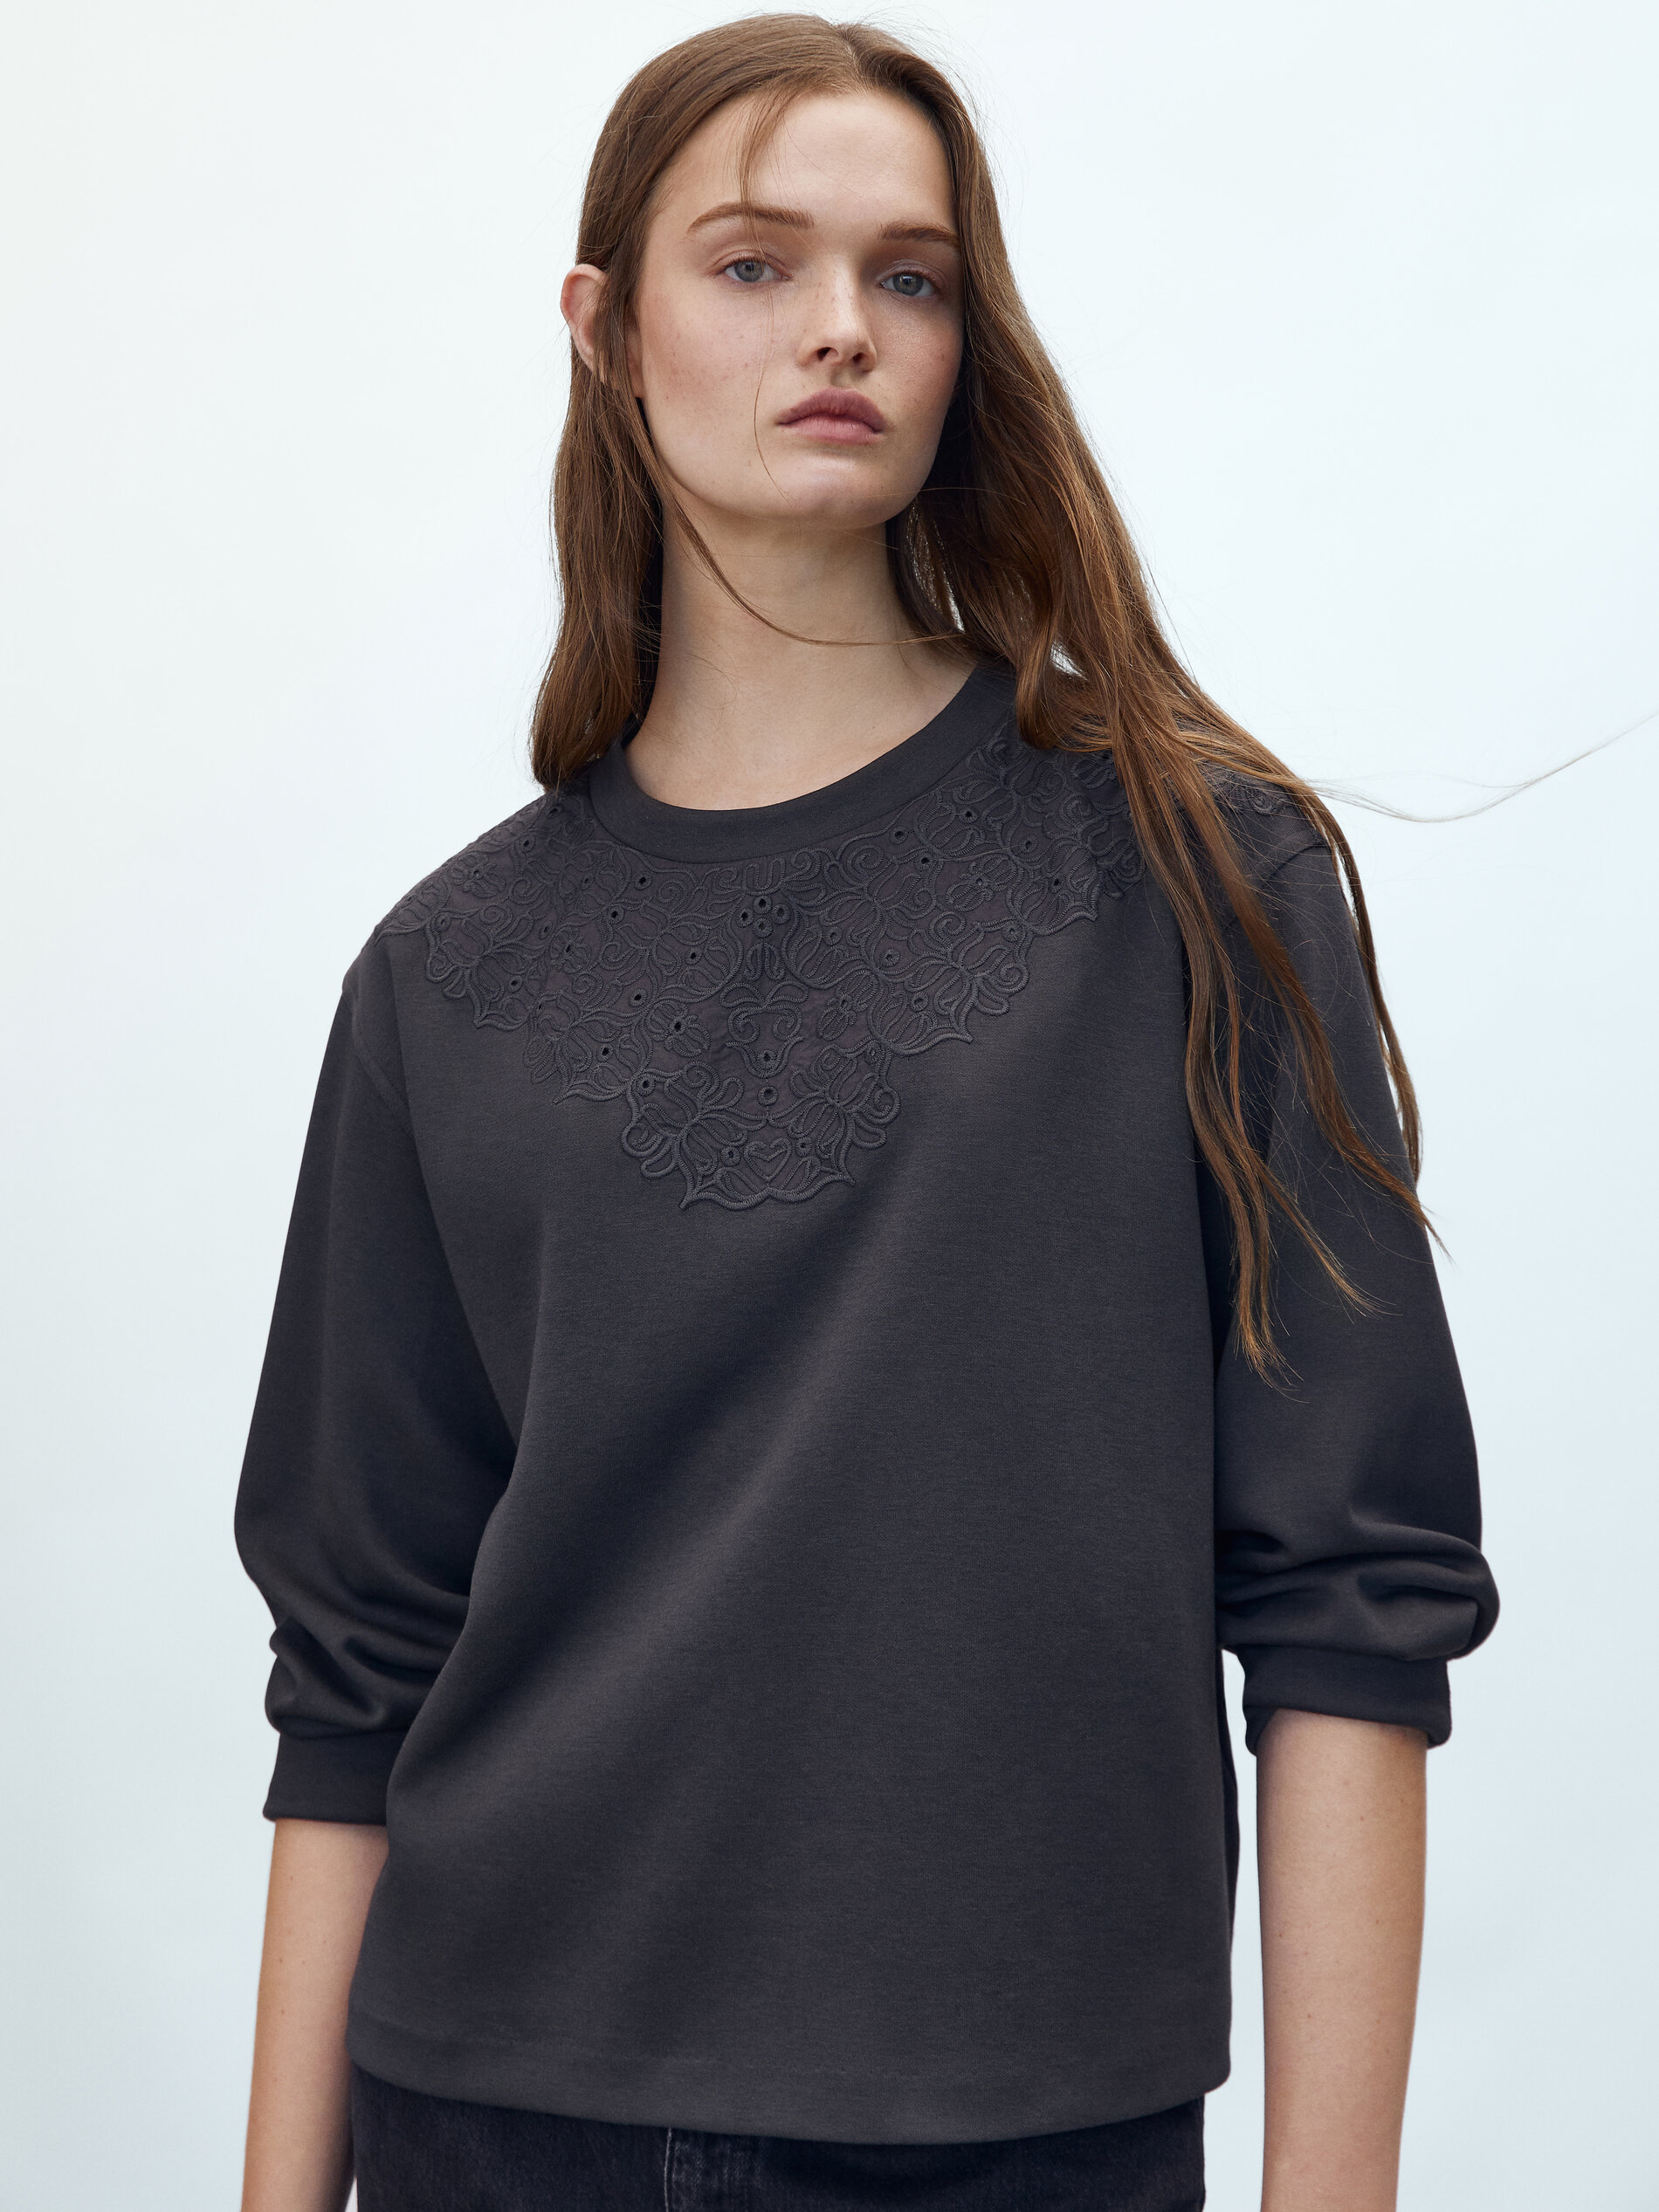 Massimo Dutti - Sweatshirt with embroidered chest